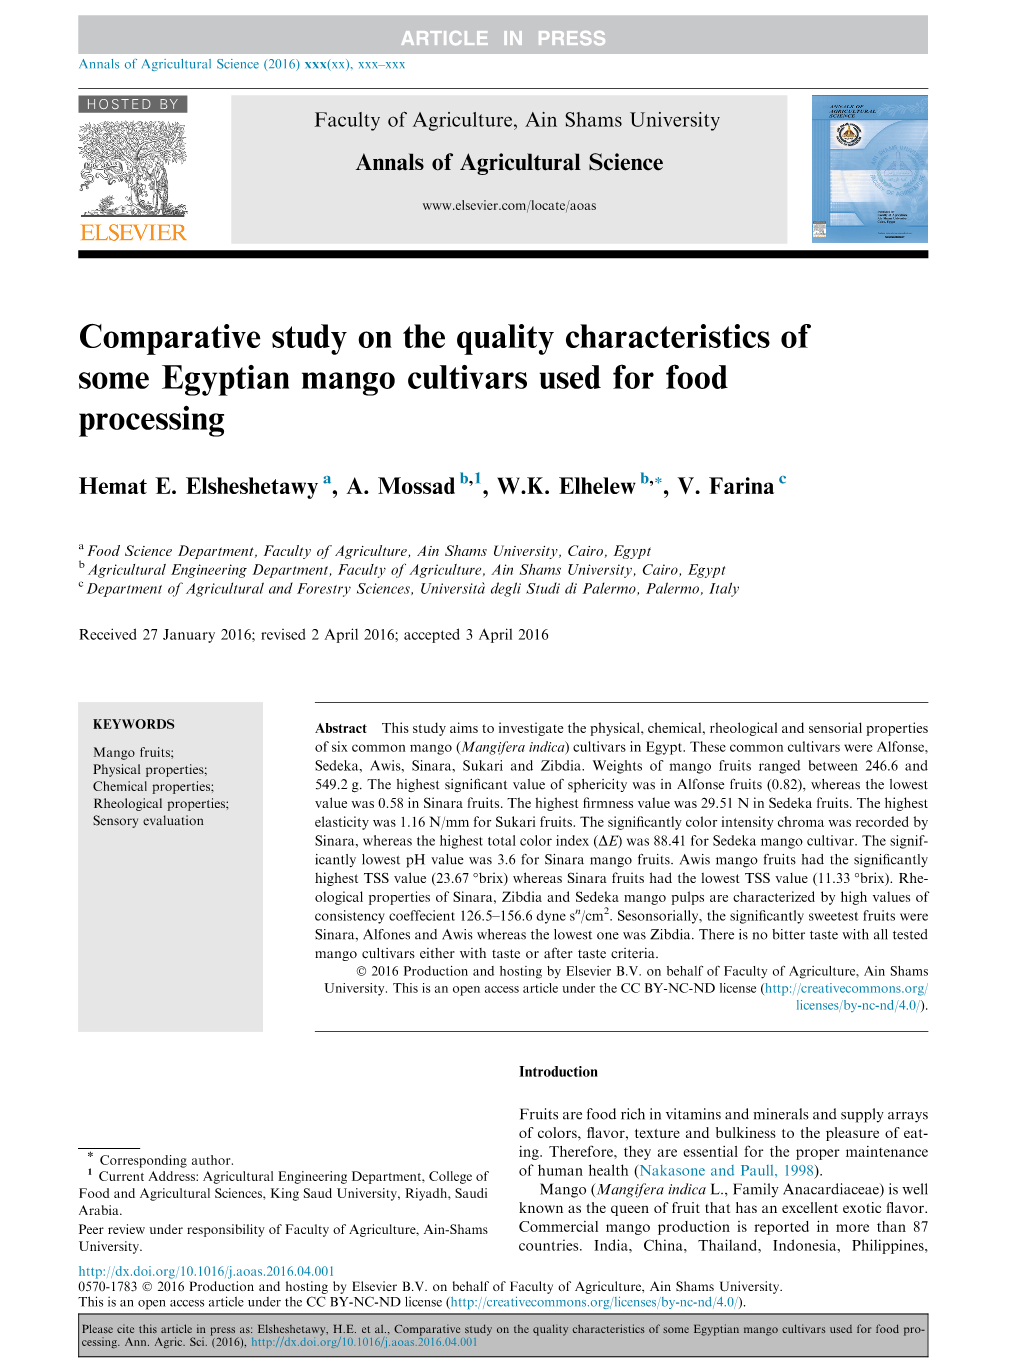 Comparative Study on the Quality Characteristics of Some Egyptian Mango Cultivars Used for Food Processing